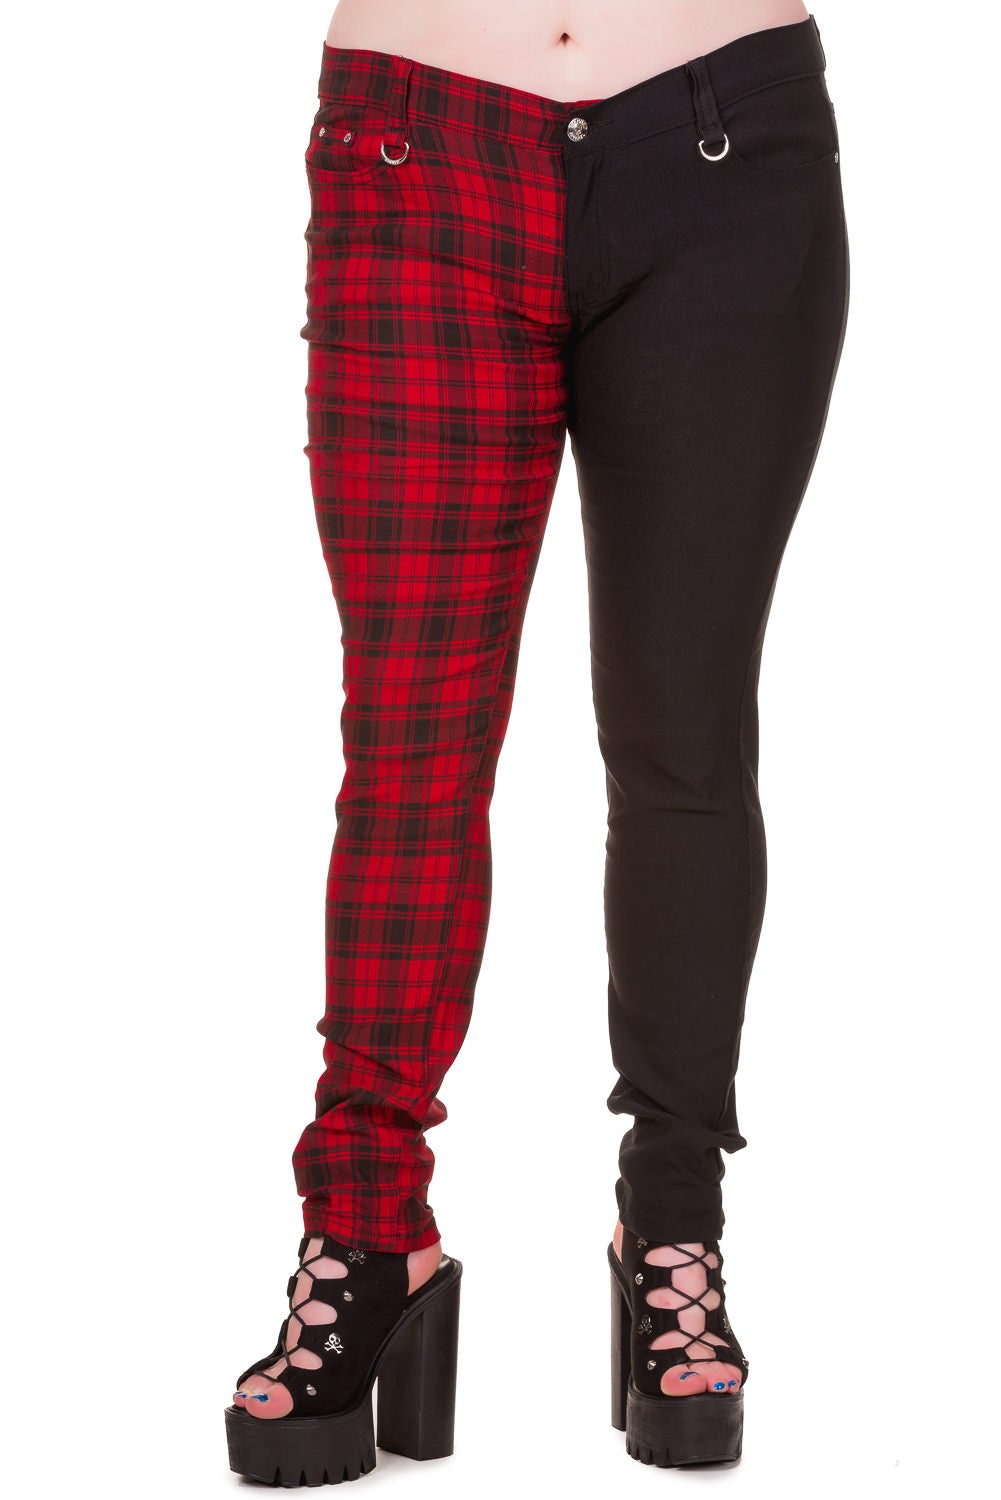 Red tartan check trousers with one leg black, low rise. 